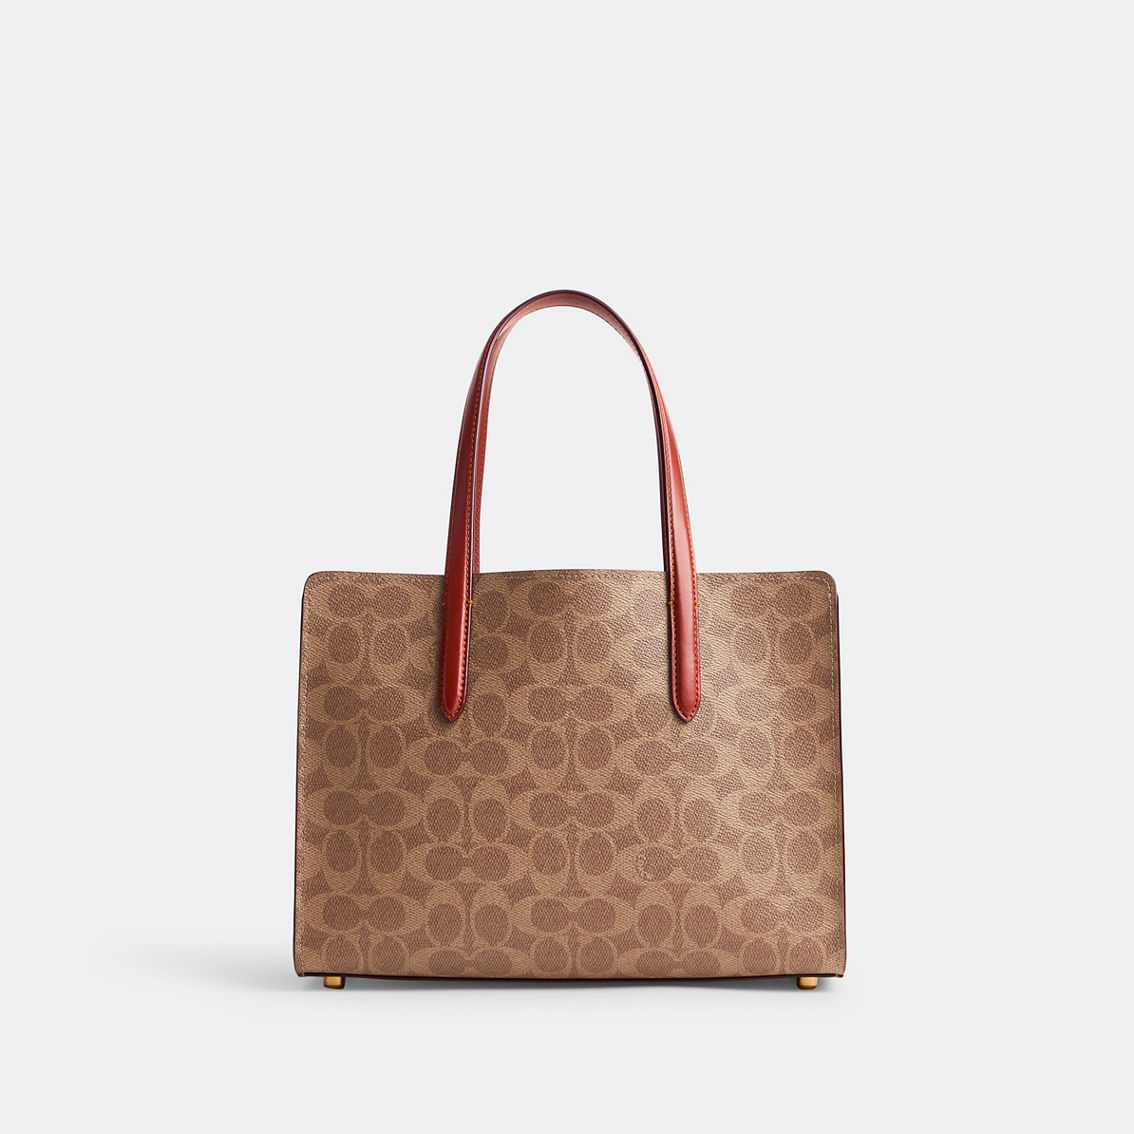 Coach Coated Canvas Signature Carter Carryall - Image 2 of 5